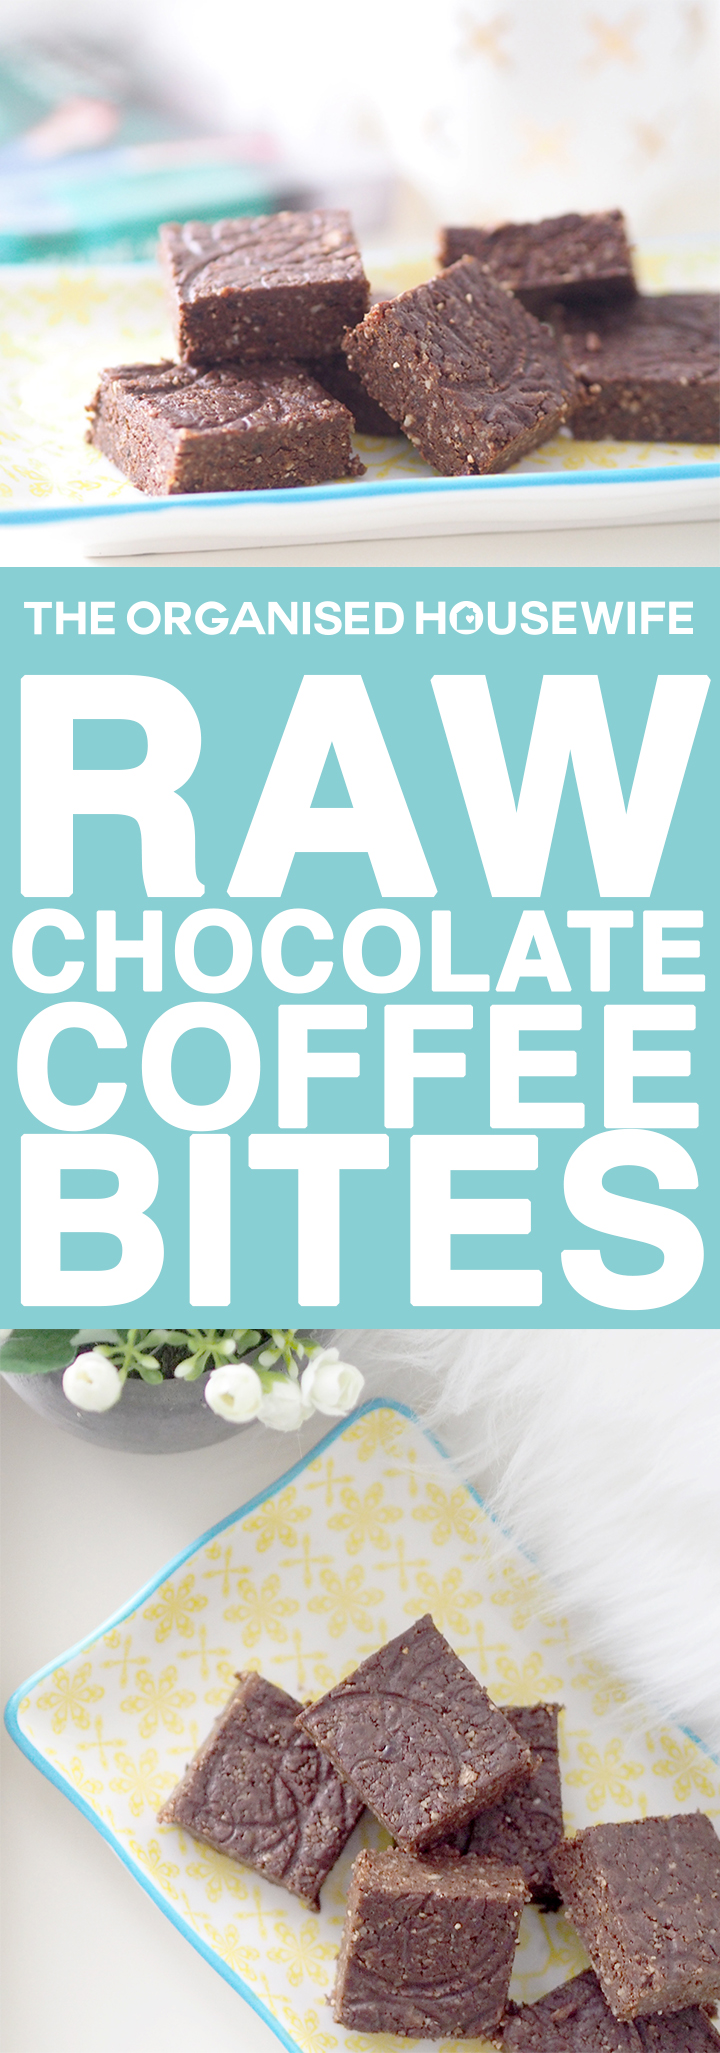 Looking for a healthy snack idea? These Raw chocolate and coffee bites are delicious and so easy to make. A perfect go to snack.